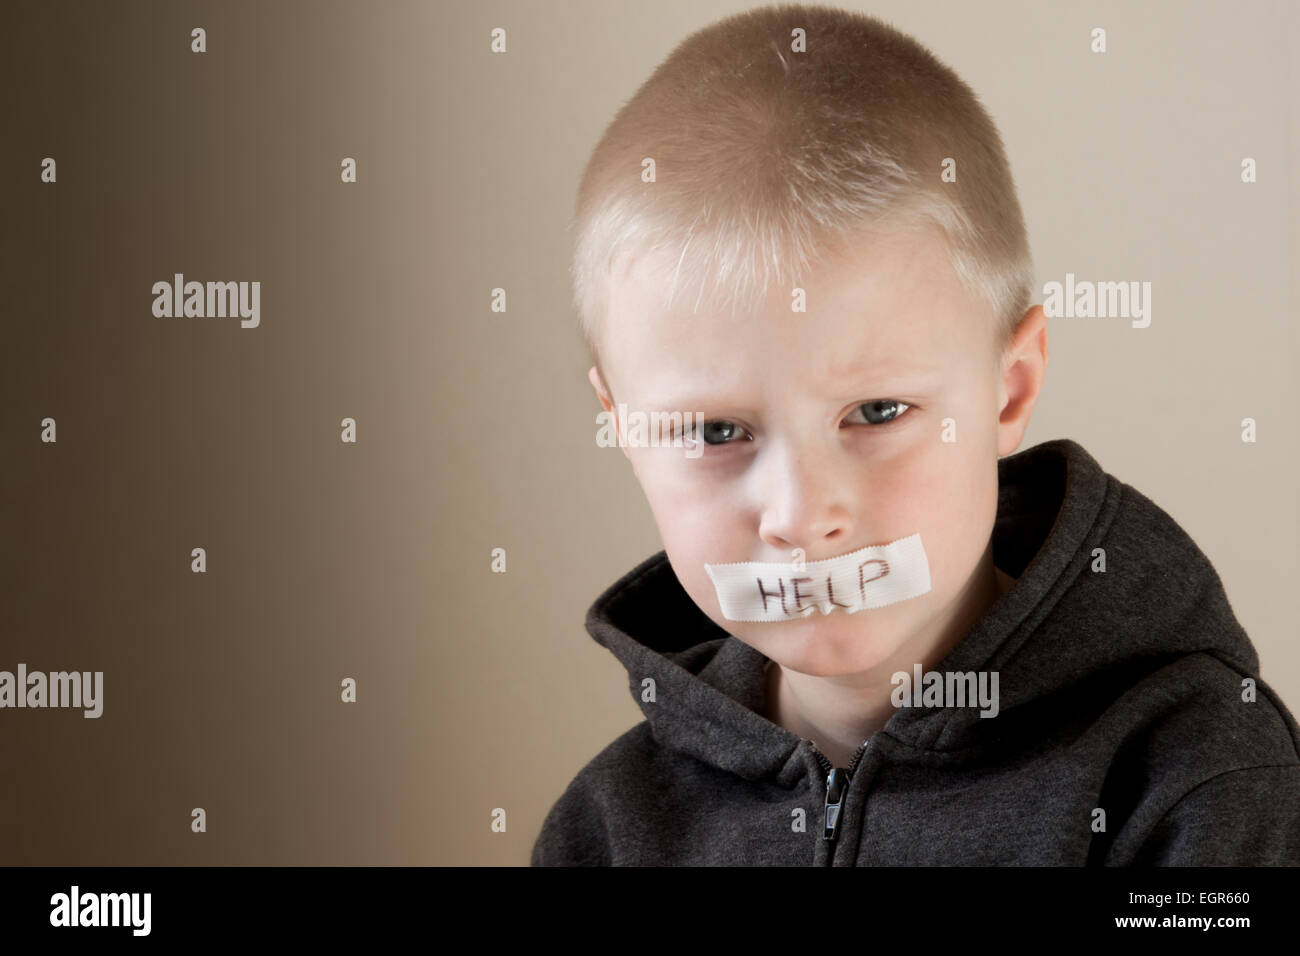 Upset abused frightened little child (boy), help, close up horizontal portrait with copy space Stock Photo